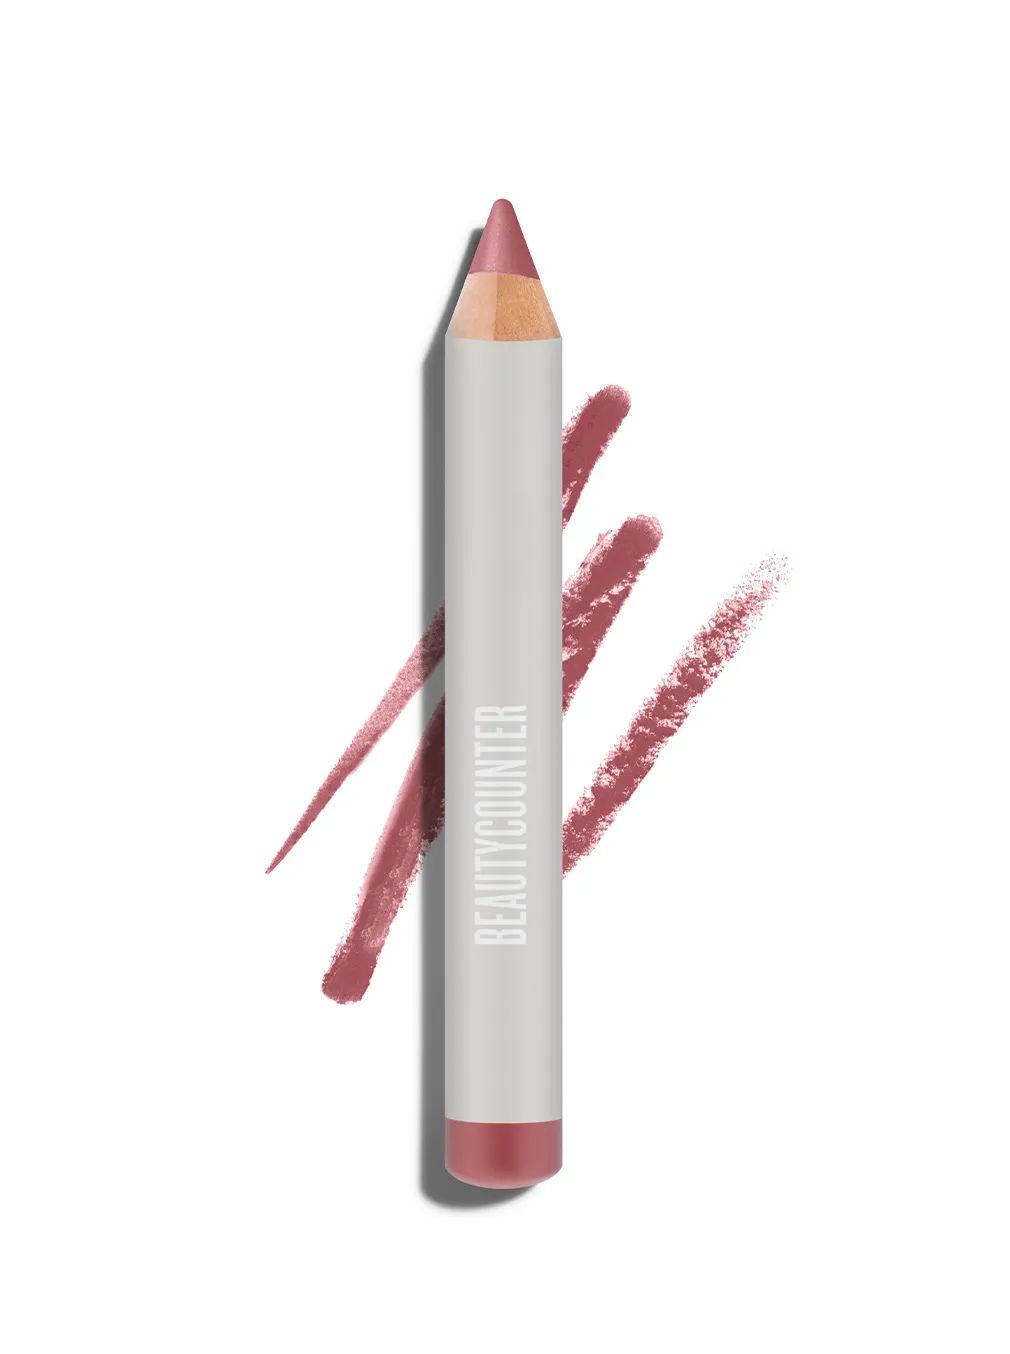 Lined & Primed Lip Defining Pencil - Beautycounter - Skin Care, Makeup, Bath and Body and more! | Beautycounter.com